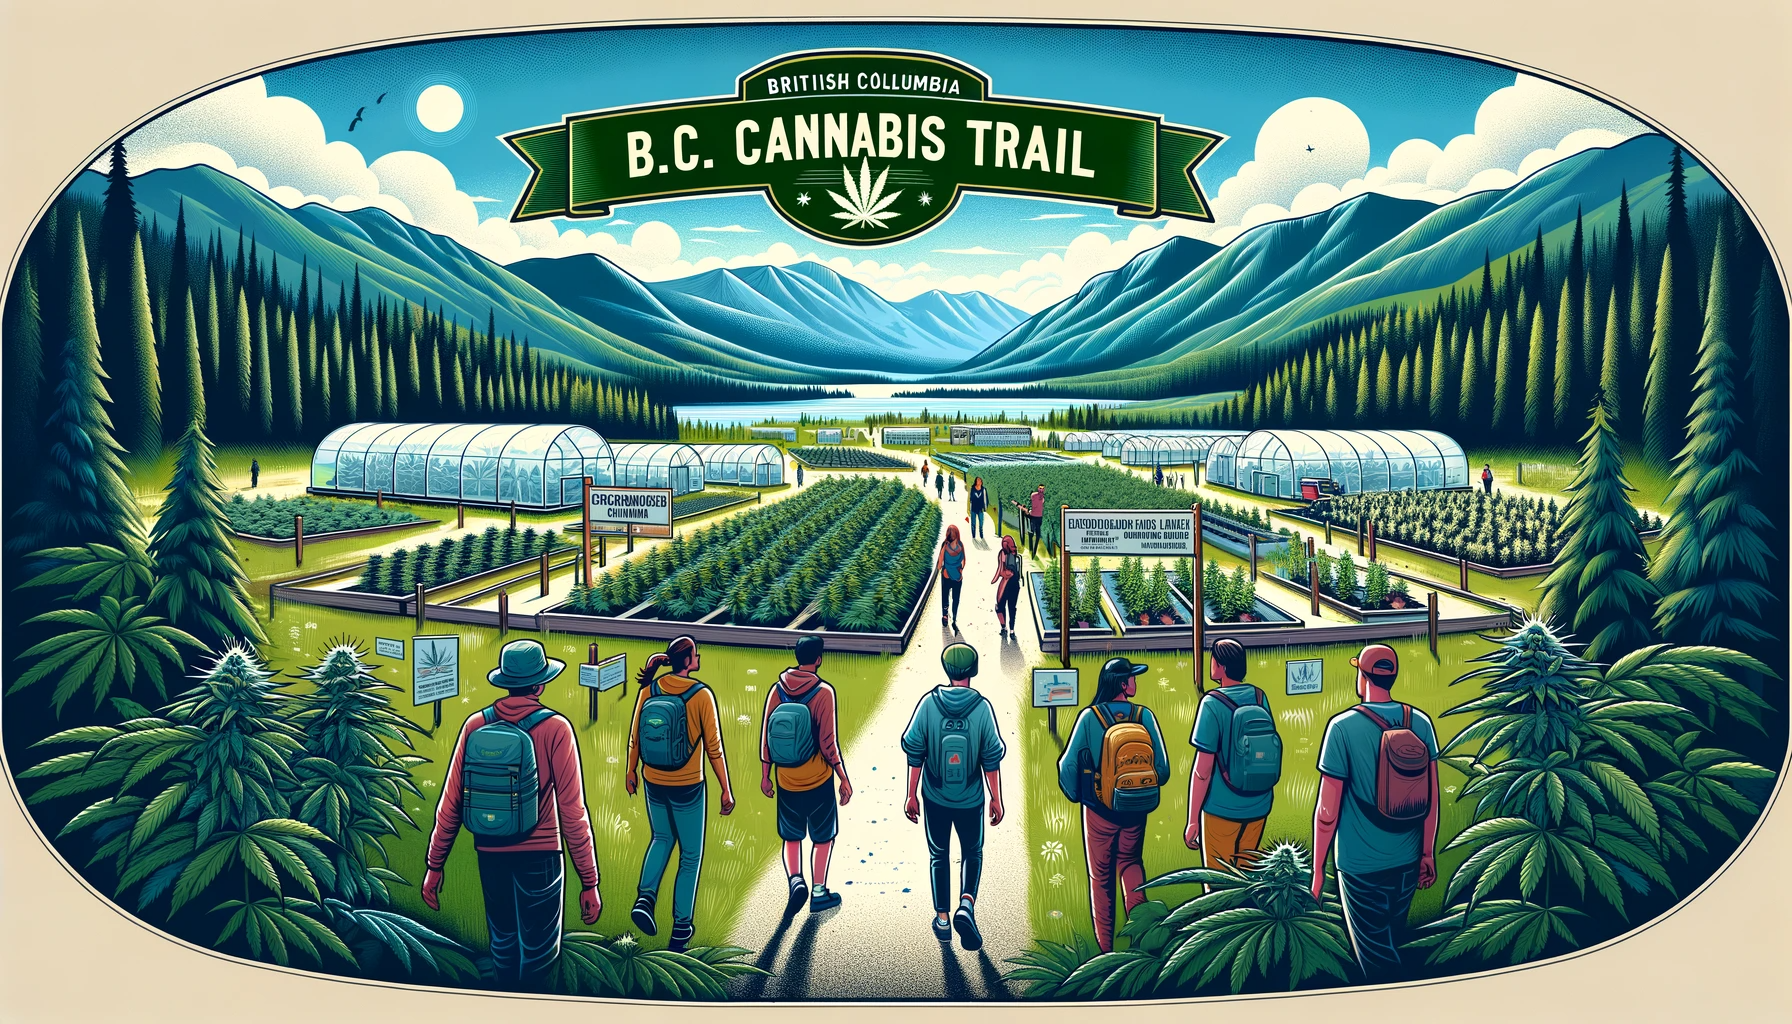 Wide panoramic illustration showcasing the B.C. Cannabis Trail in British Columbia, Canada. The image features a scenic view of the Kootenays and Cowi